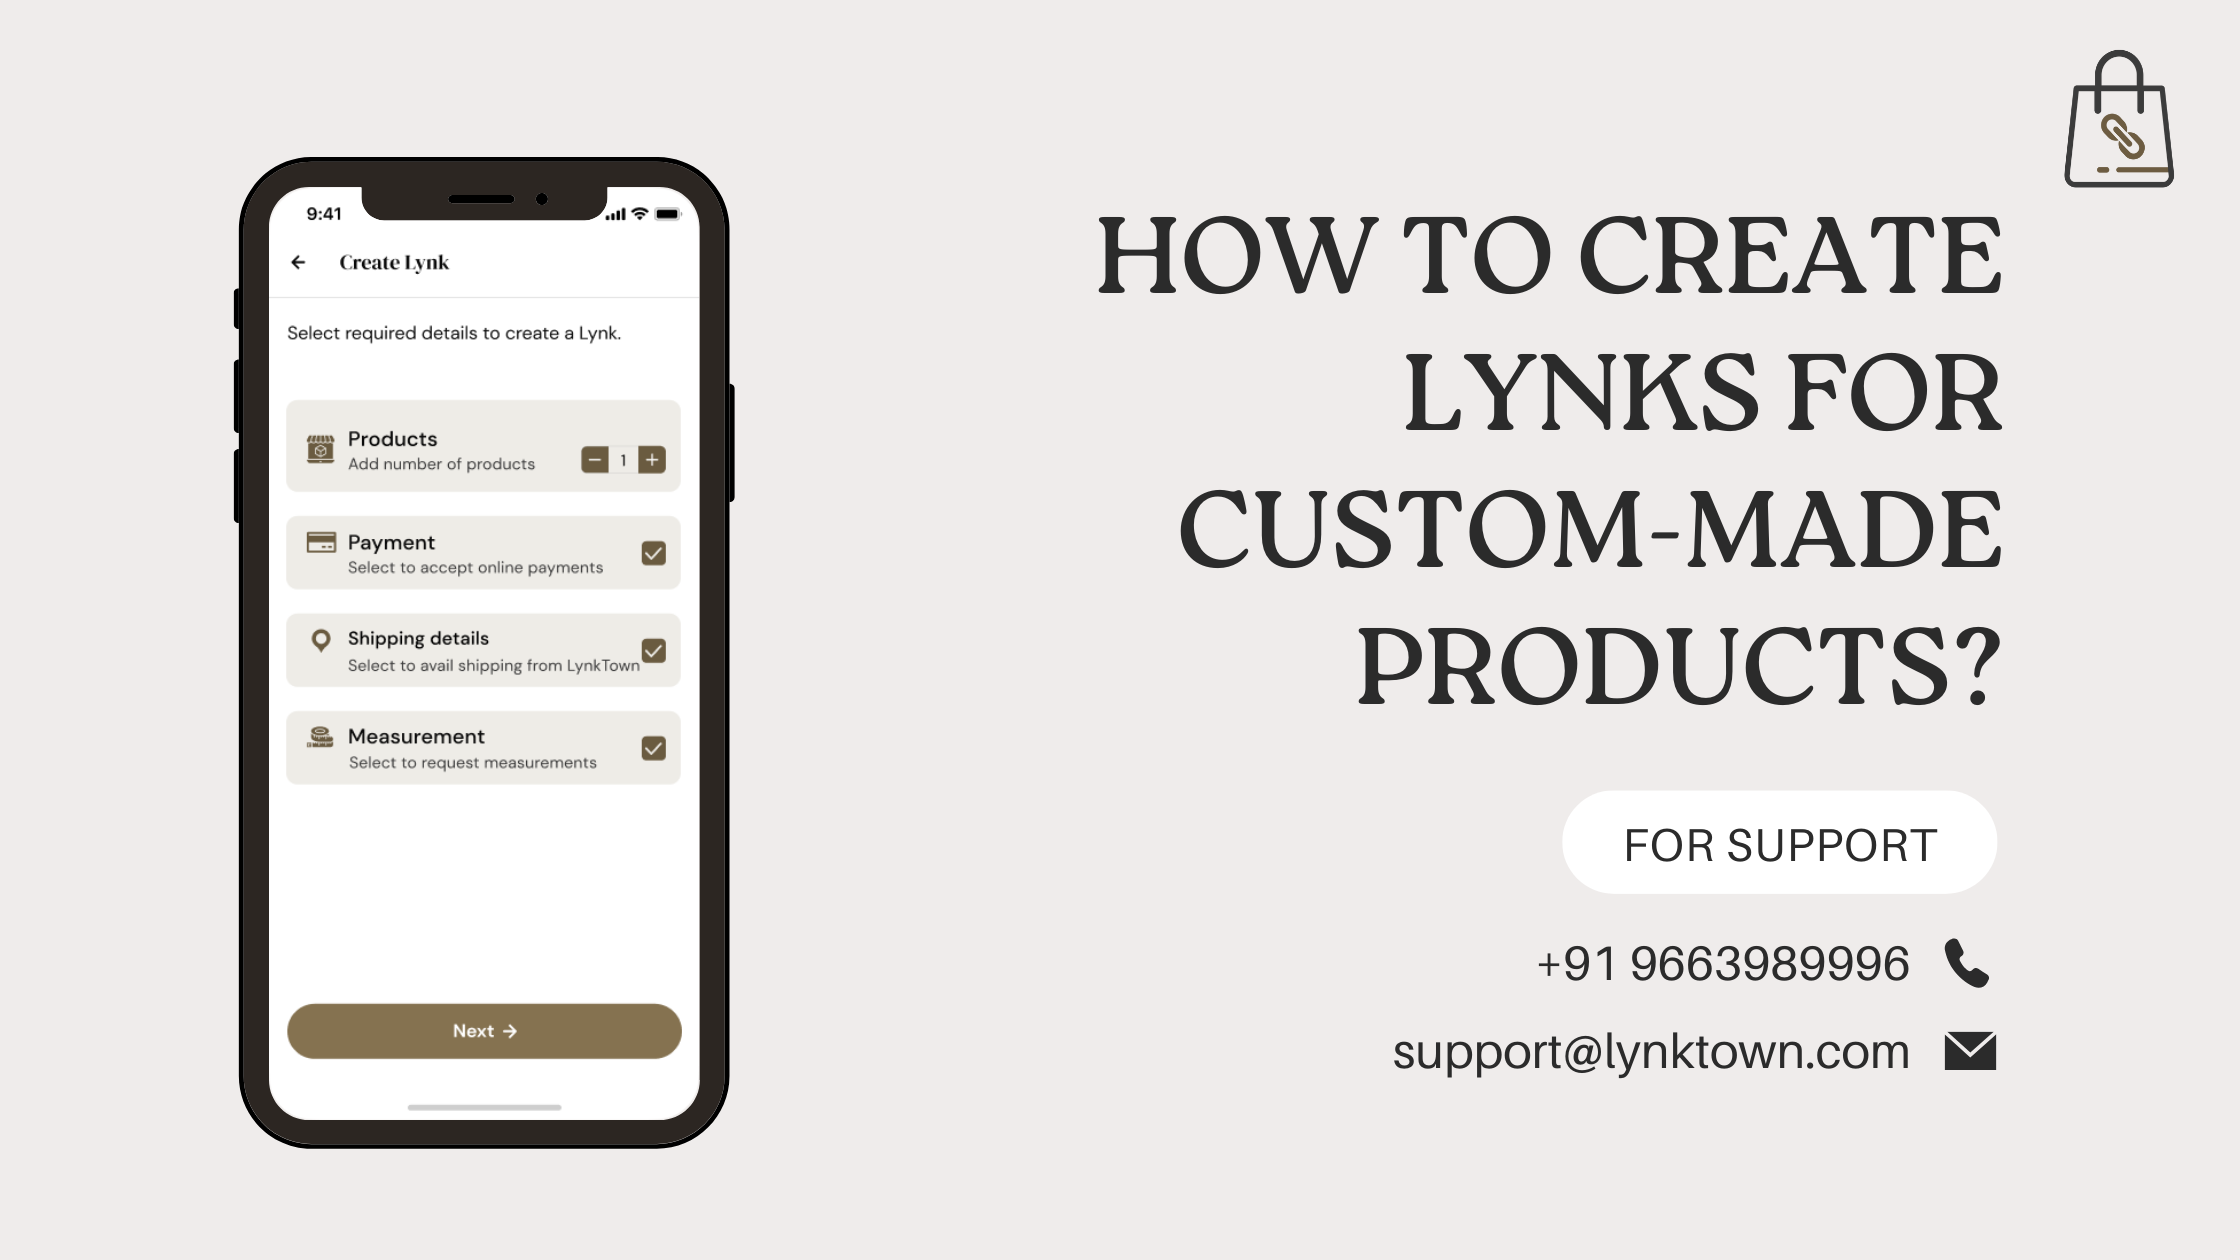 How to create a Lynk for custom-made products?